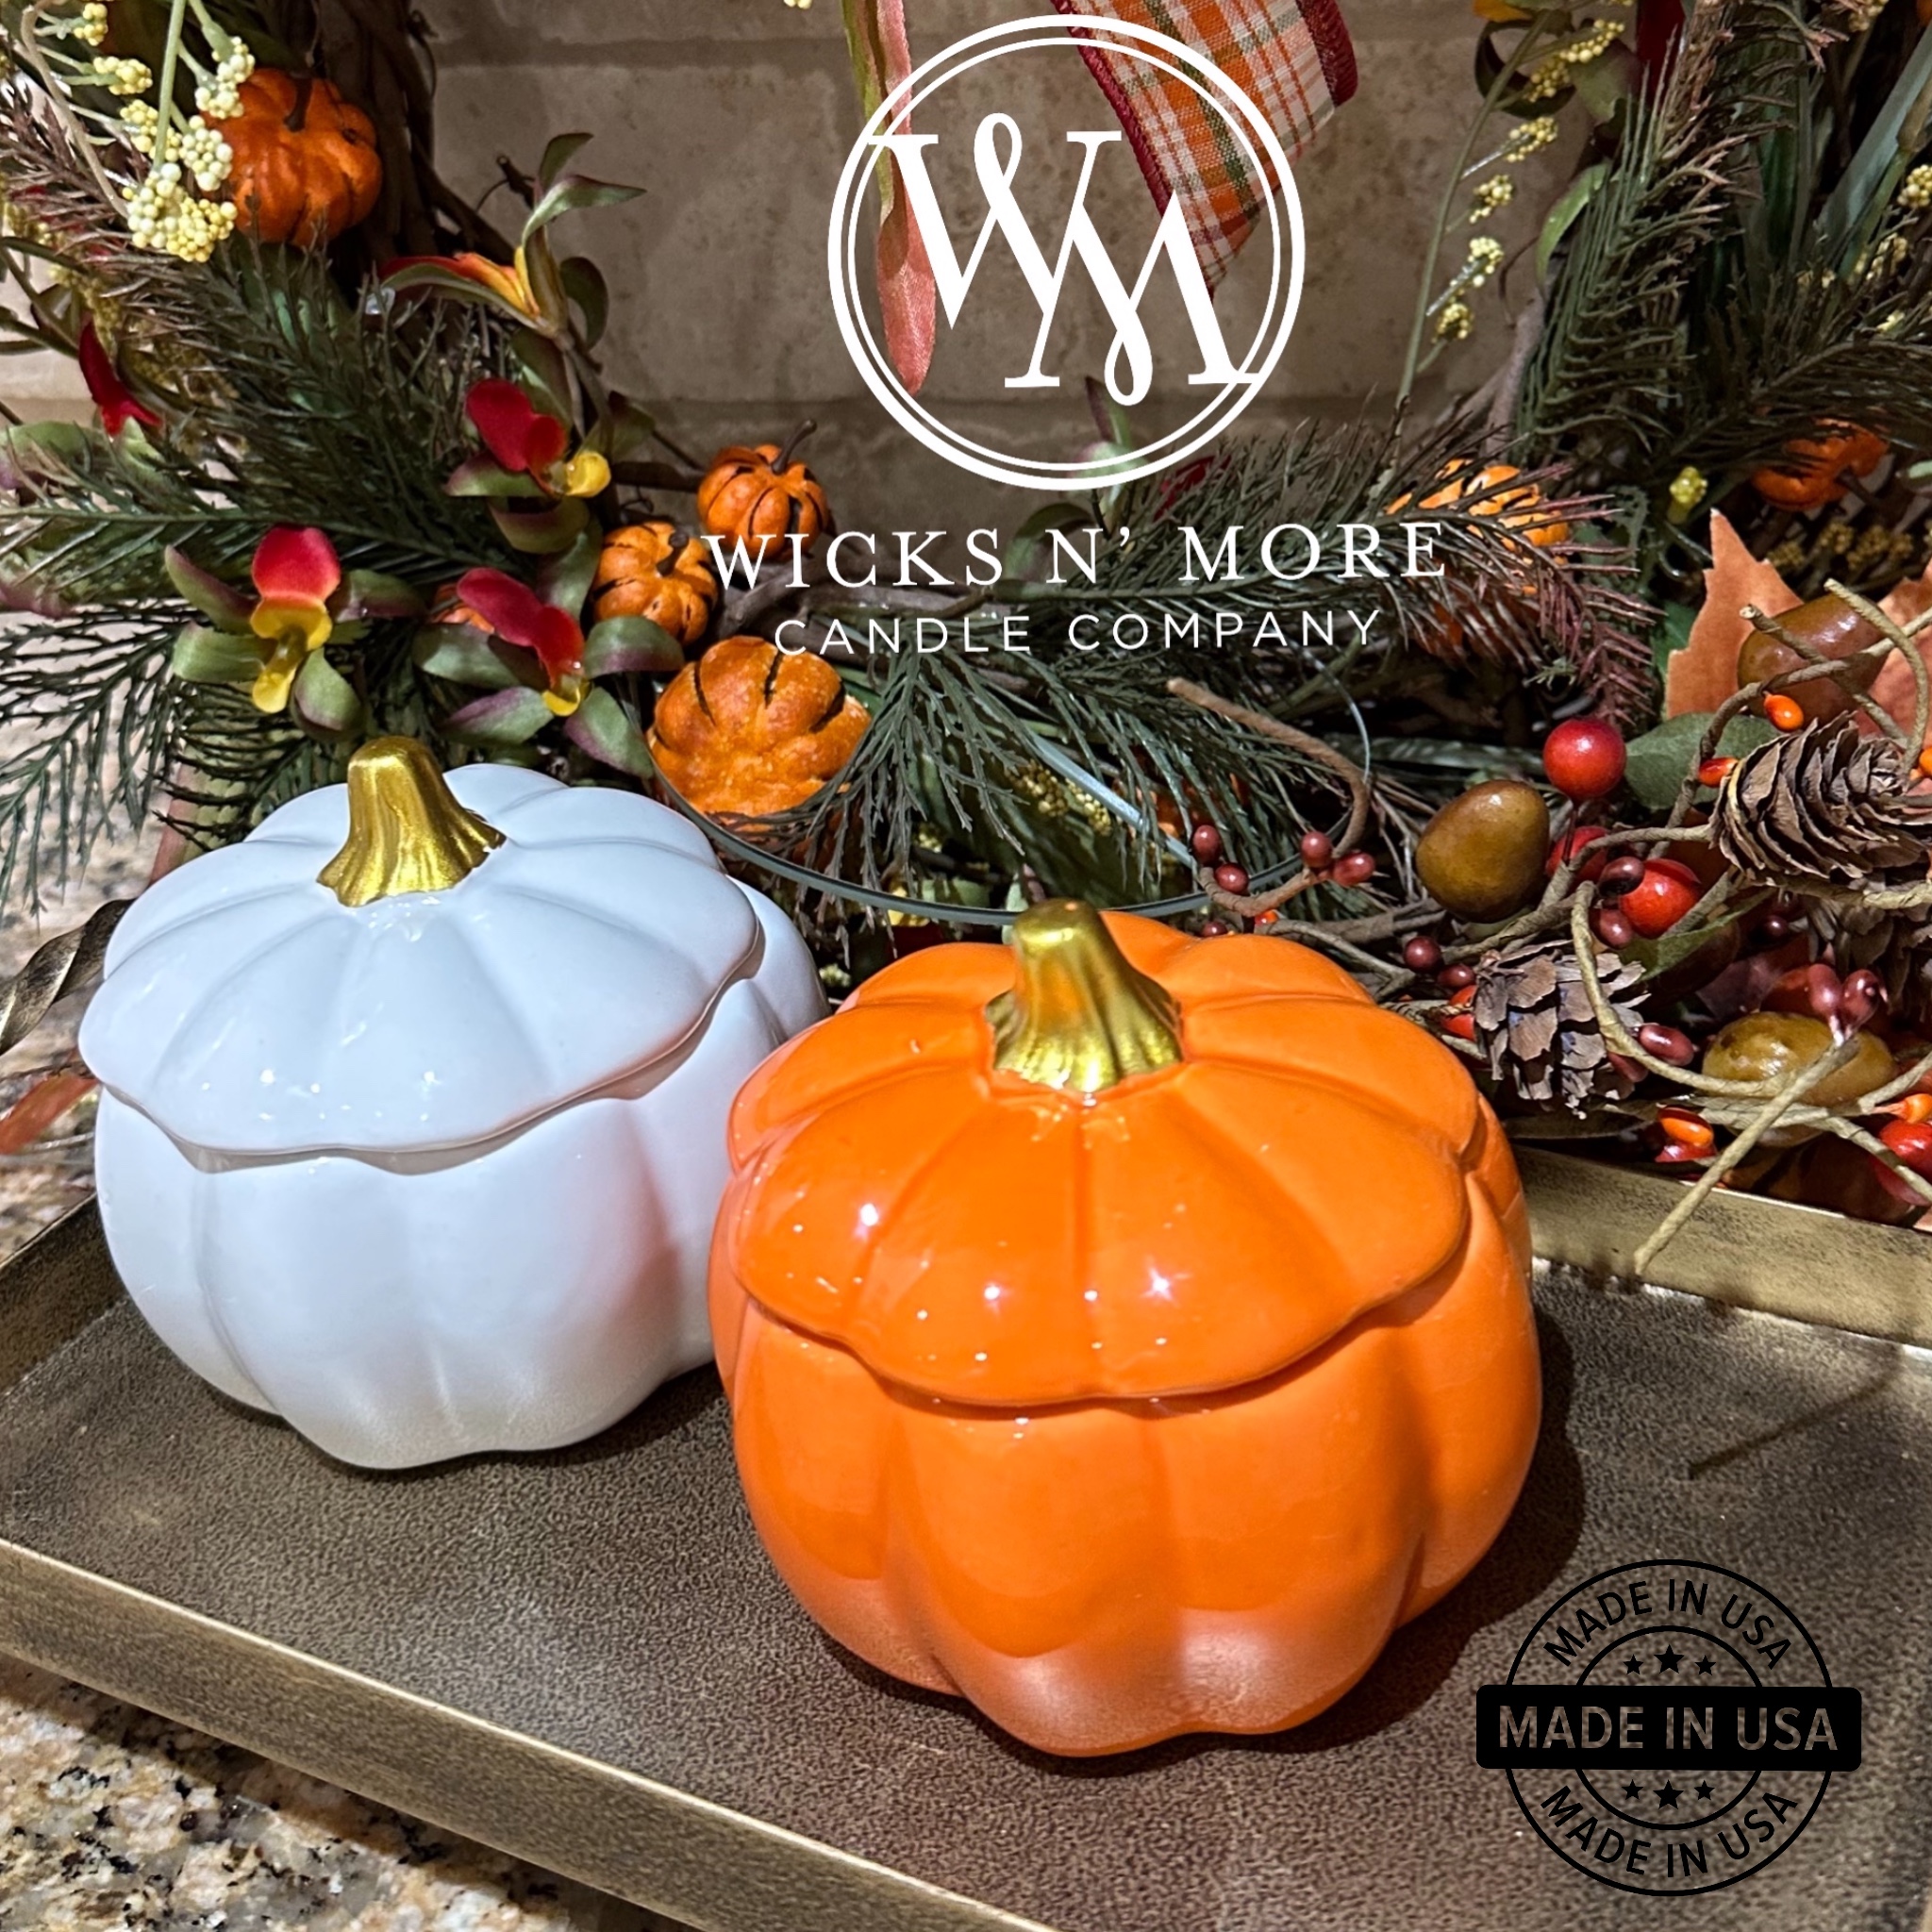 Pumpkin Candle Jar, 3.93.8 in Ceramic Candle Jar, Washable Pumpkin Jar,  Pumpkin Container with Lid, Pumpkin-Shaped Candle for Decoration Home Decor